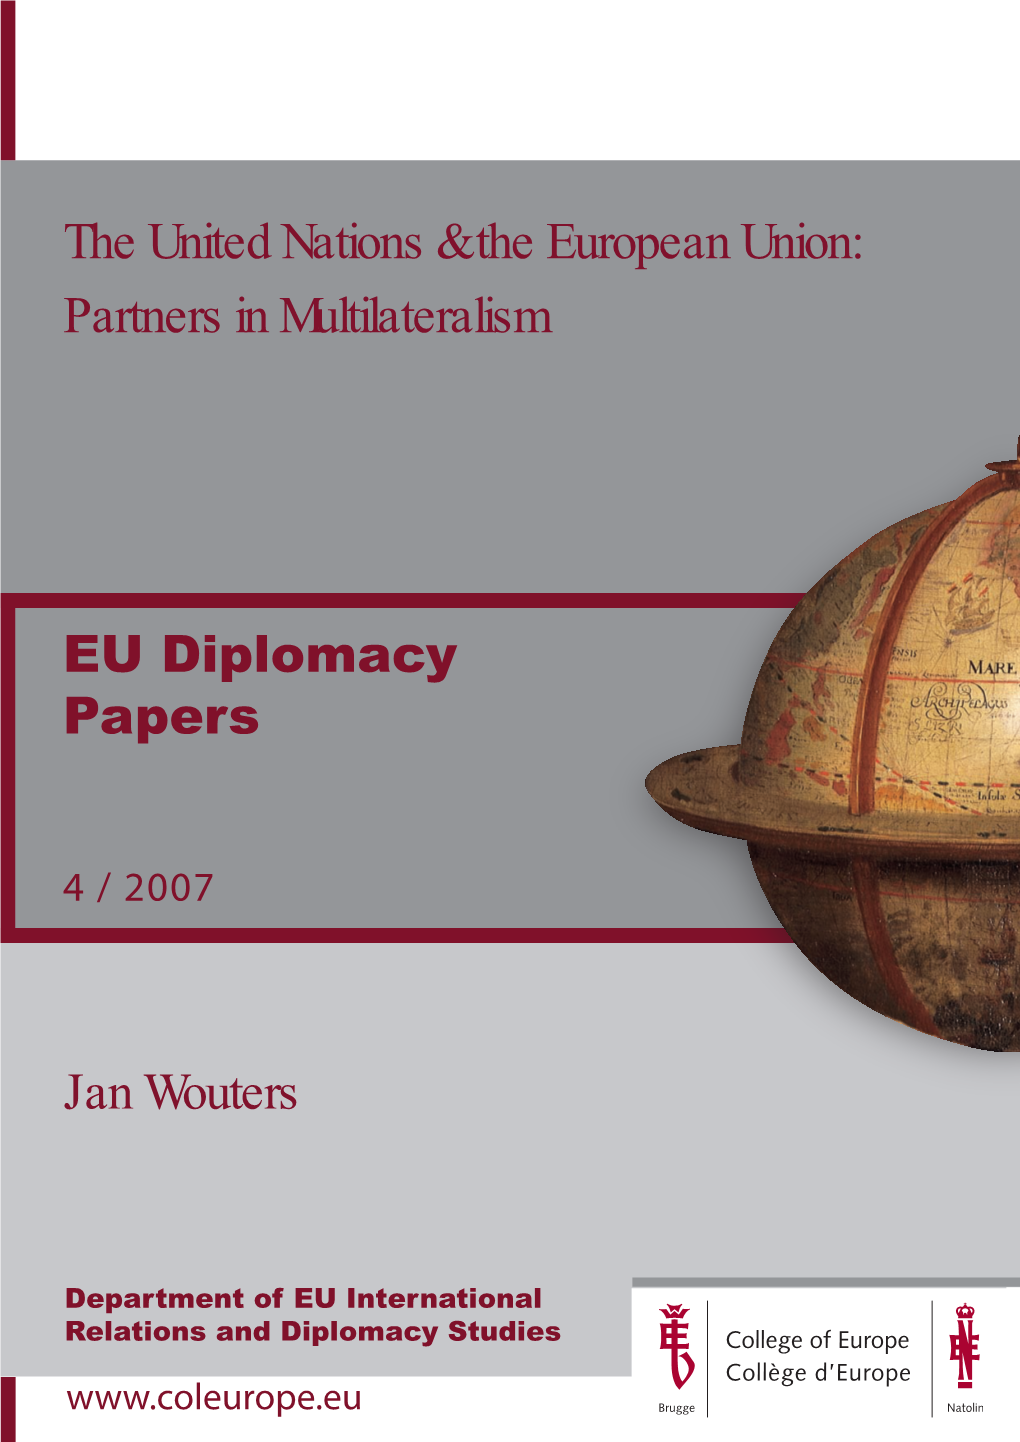 EU Diplomacy Papers the United Nations & the European Union